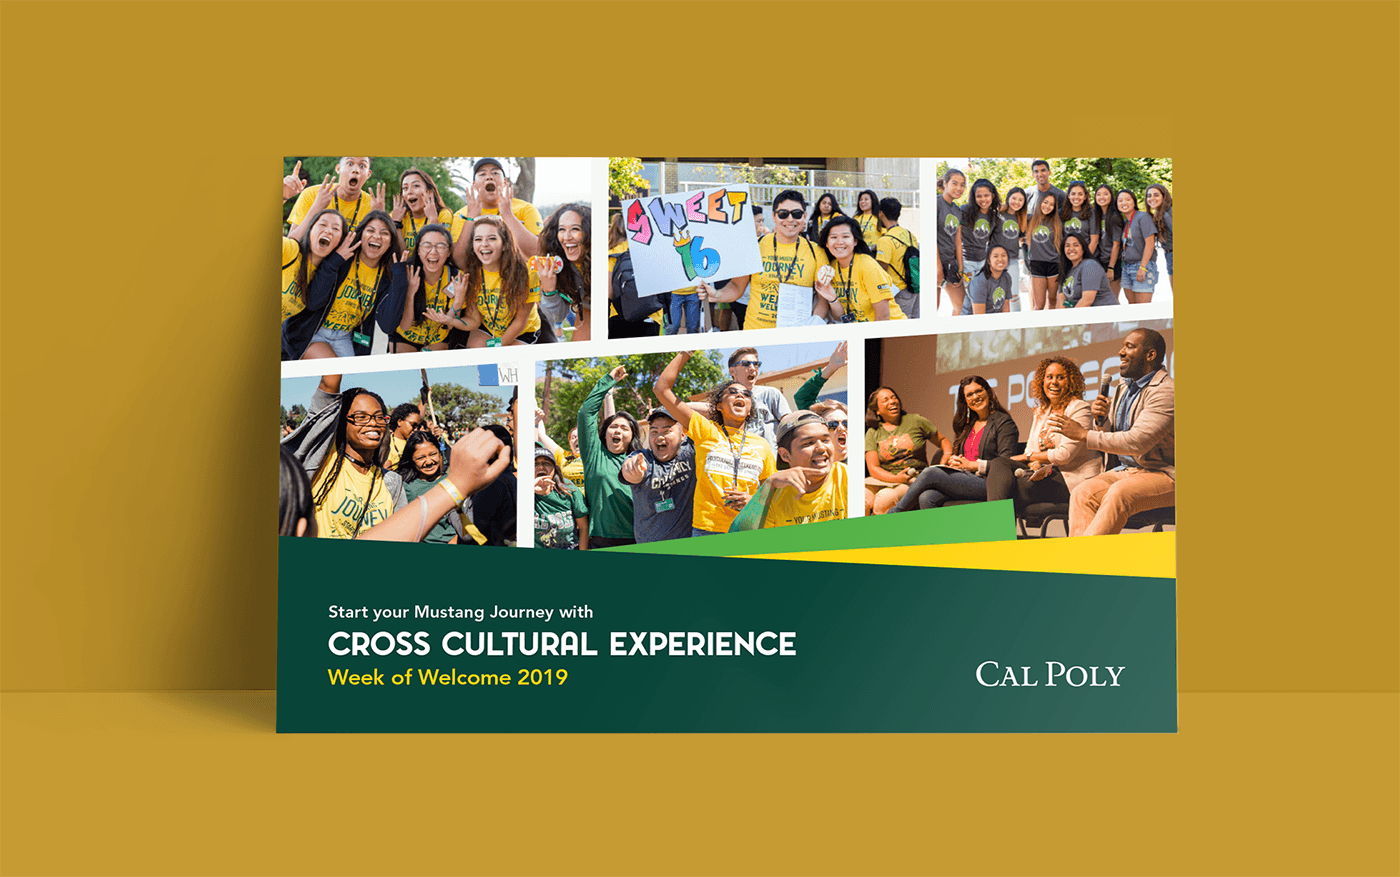 A postcard for the Week of Welcome Cross Cultural Experience set against a light tan background. The postcard features a tagline and imagery of students cheering during Orientation events.